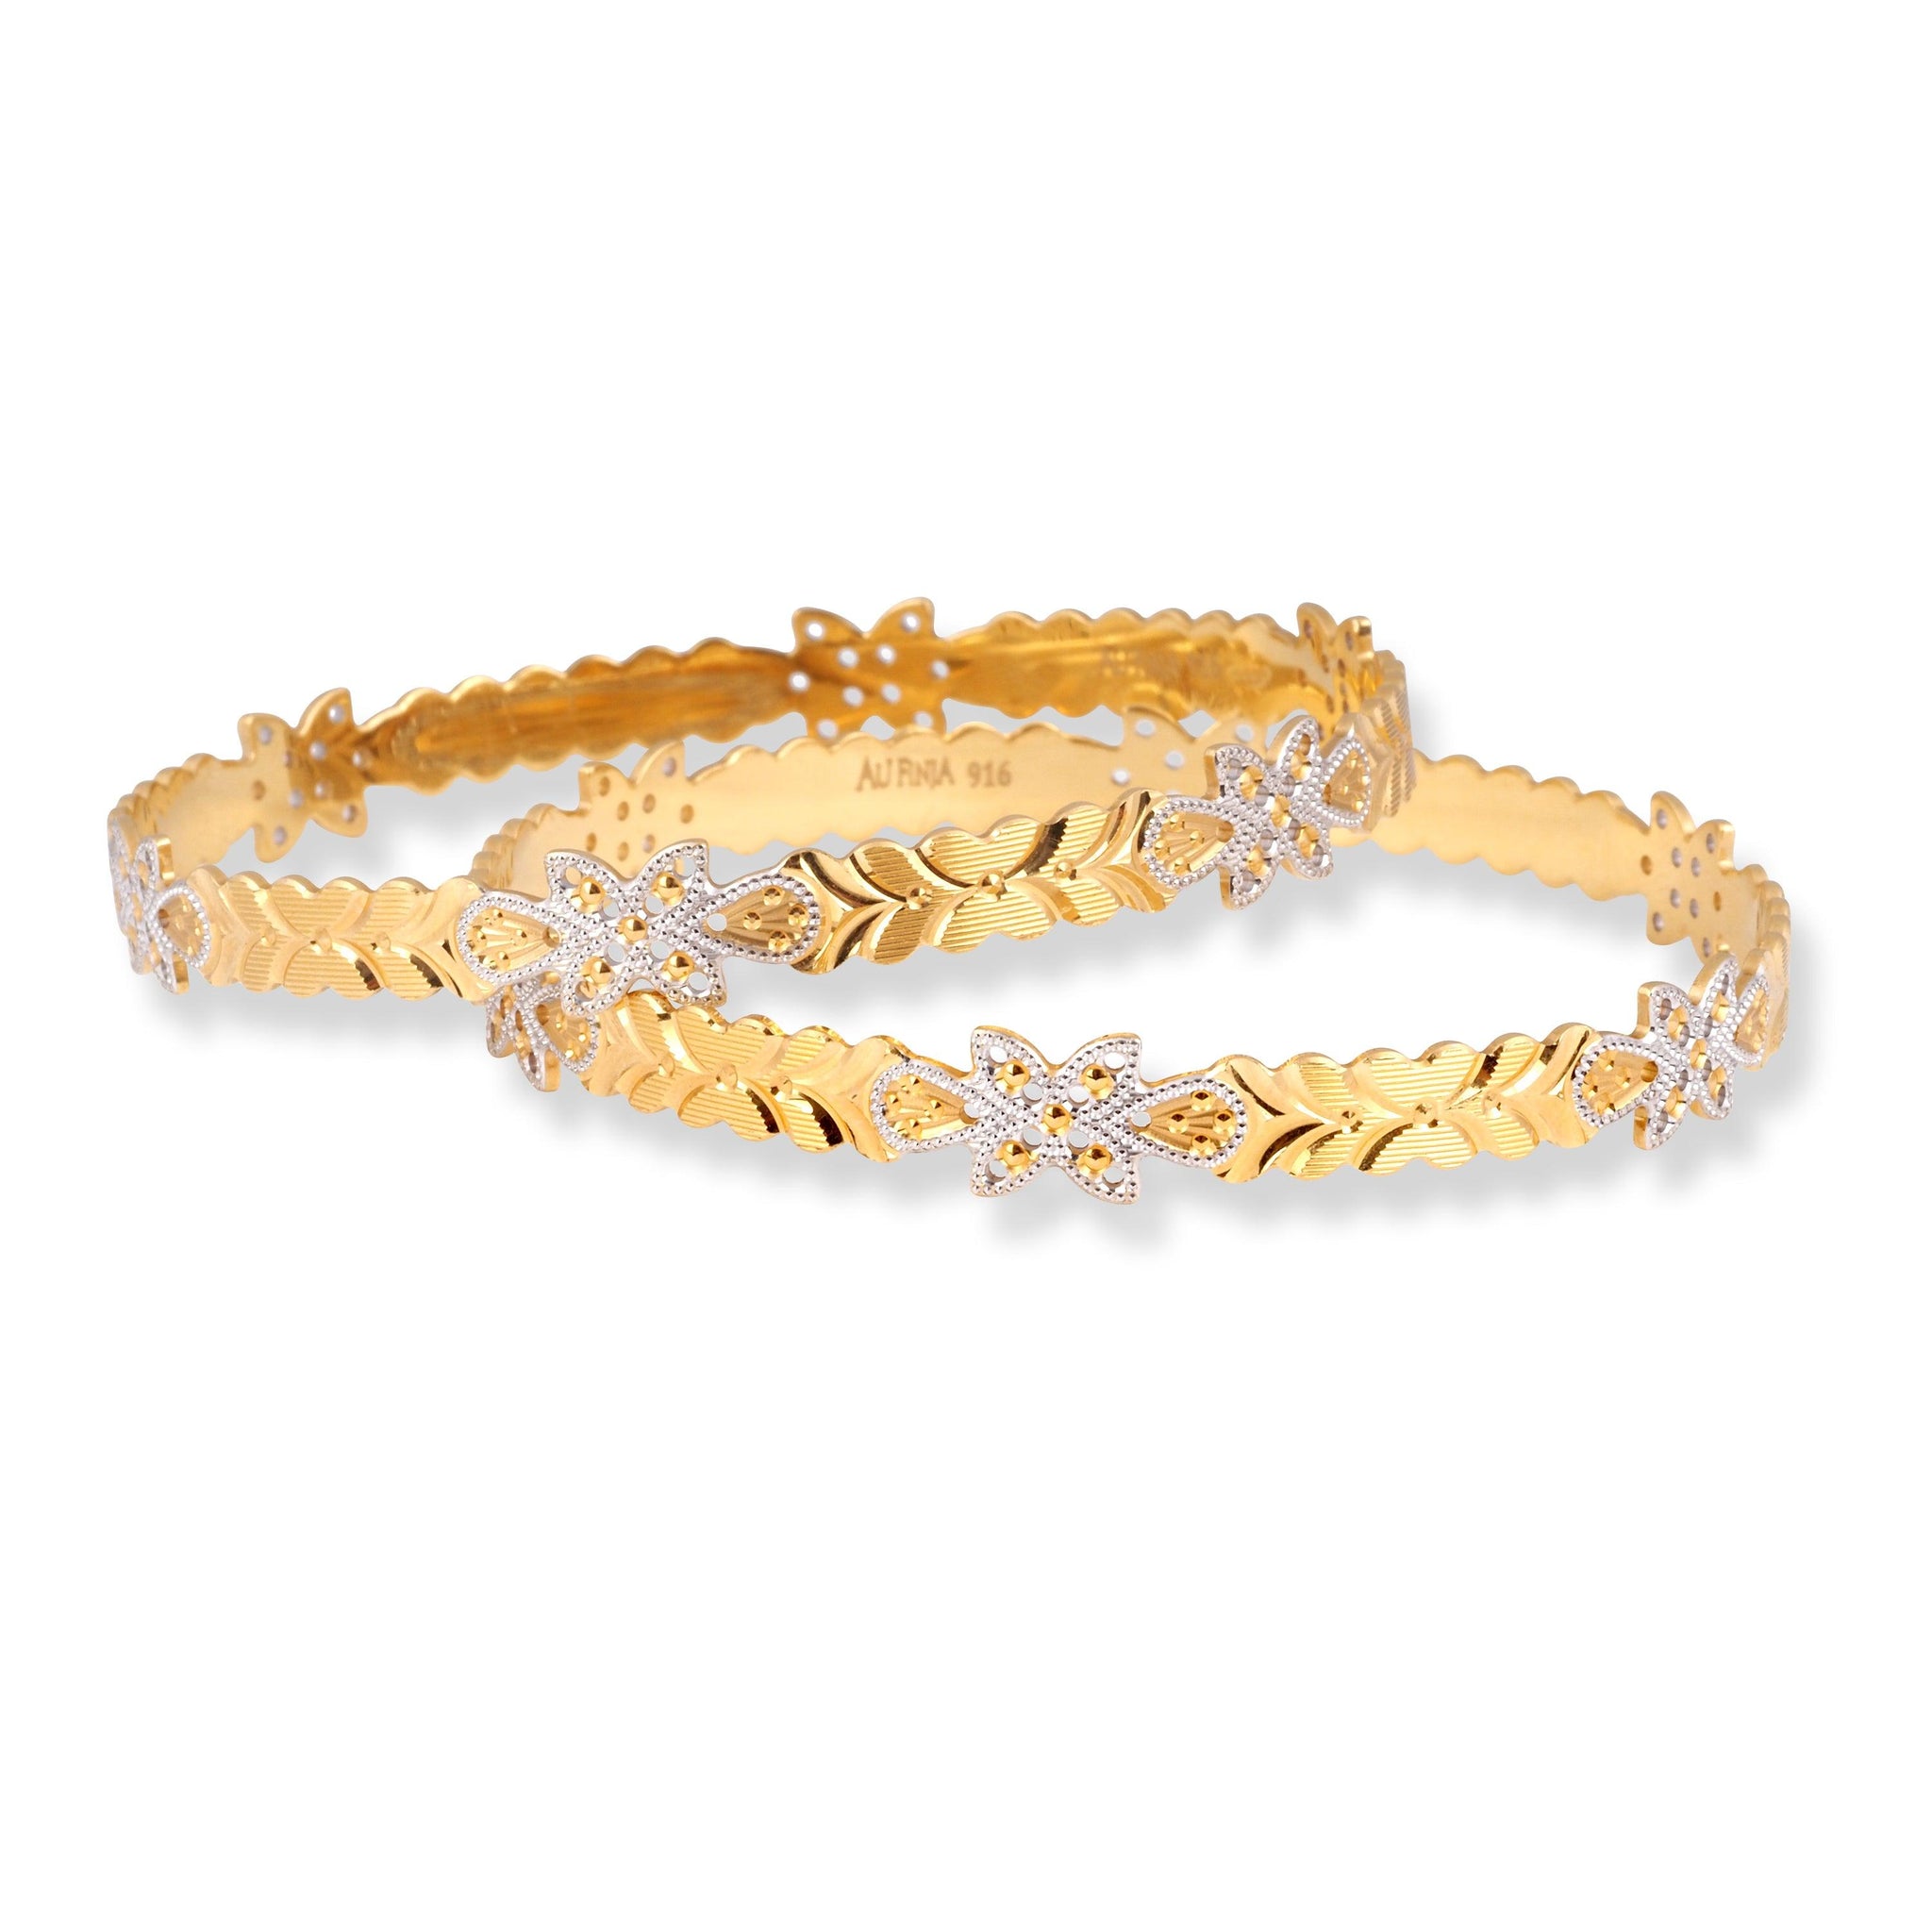 Pair of 22ct Gold Bangles with Flower Design and Rhodium Plating B-8566